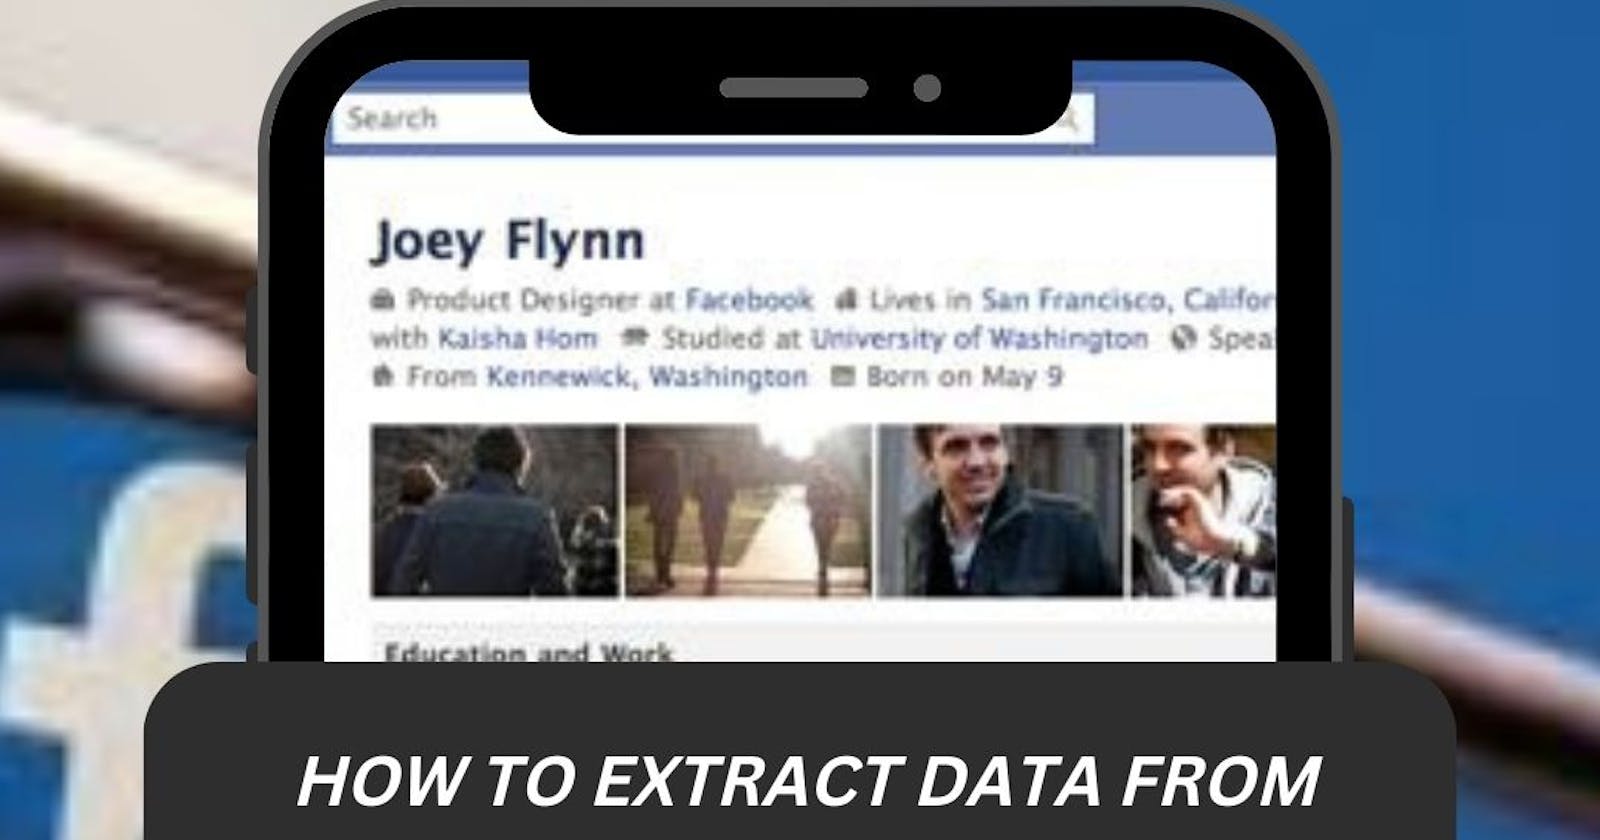 How To Extract Data From Facebook Profile?